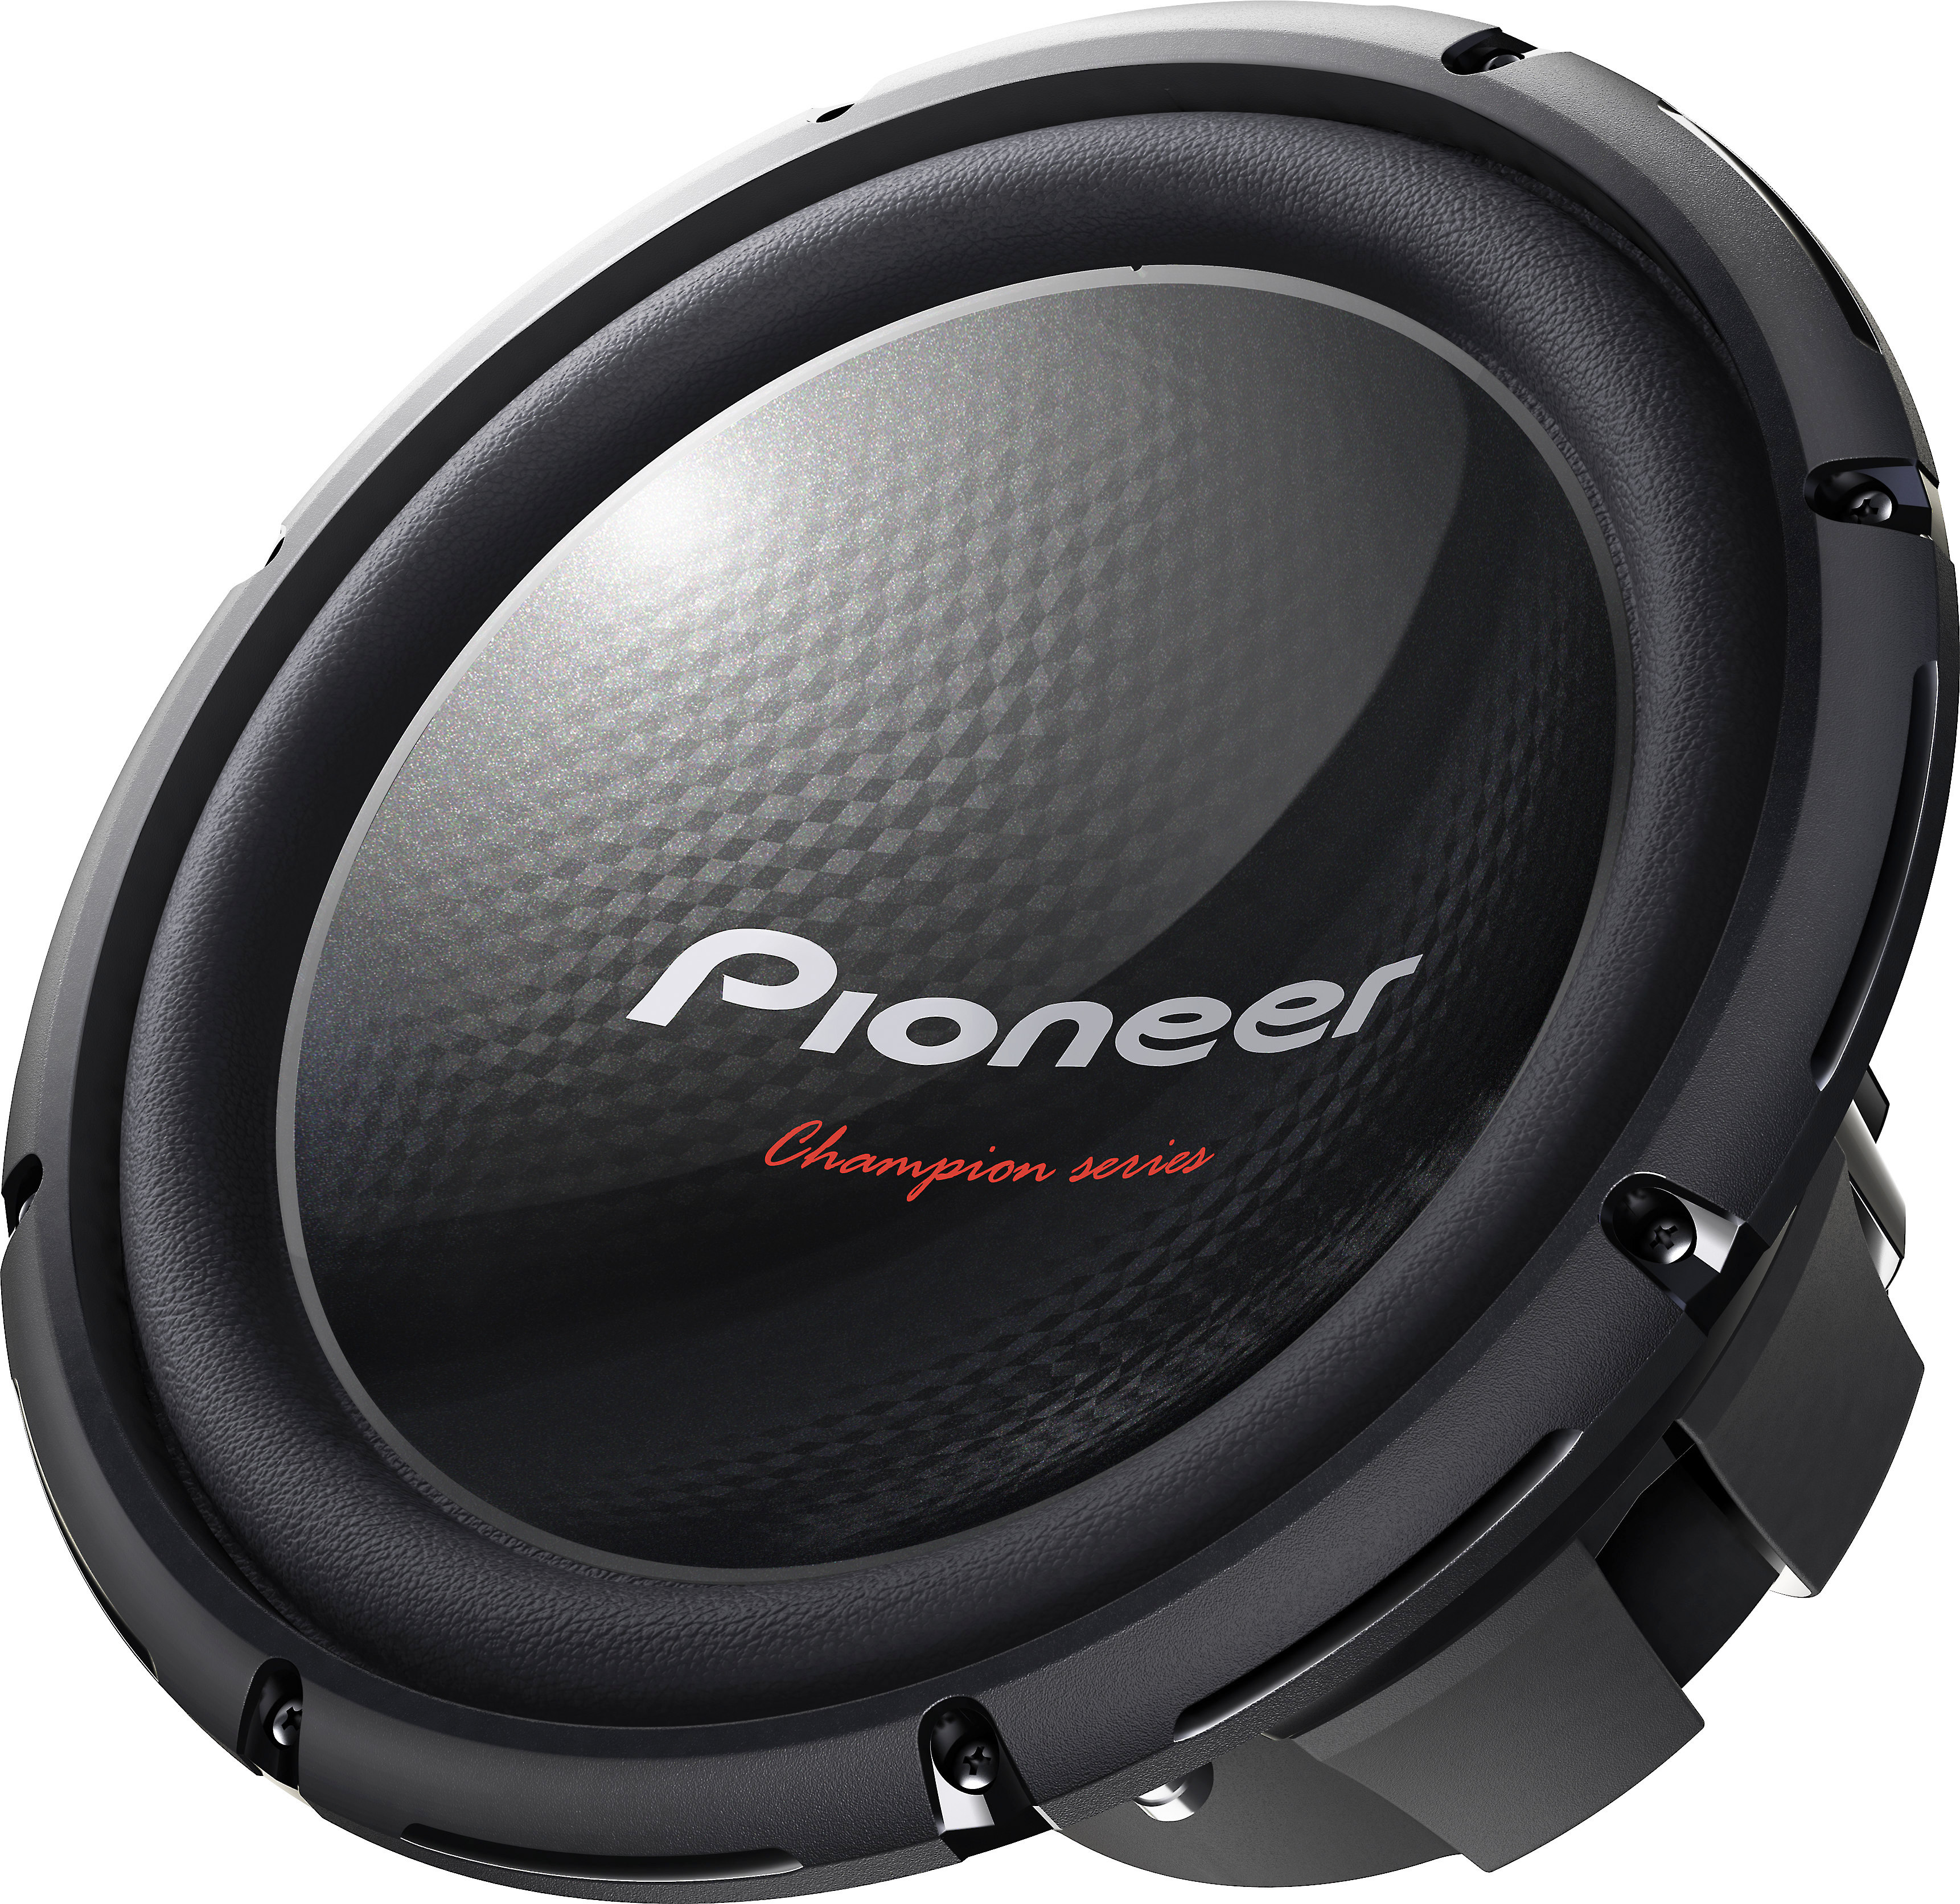 Pioneer TS-W310S4 Champion Series 12" 4-ohm subwoofer at Crutchfield